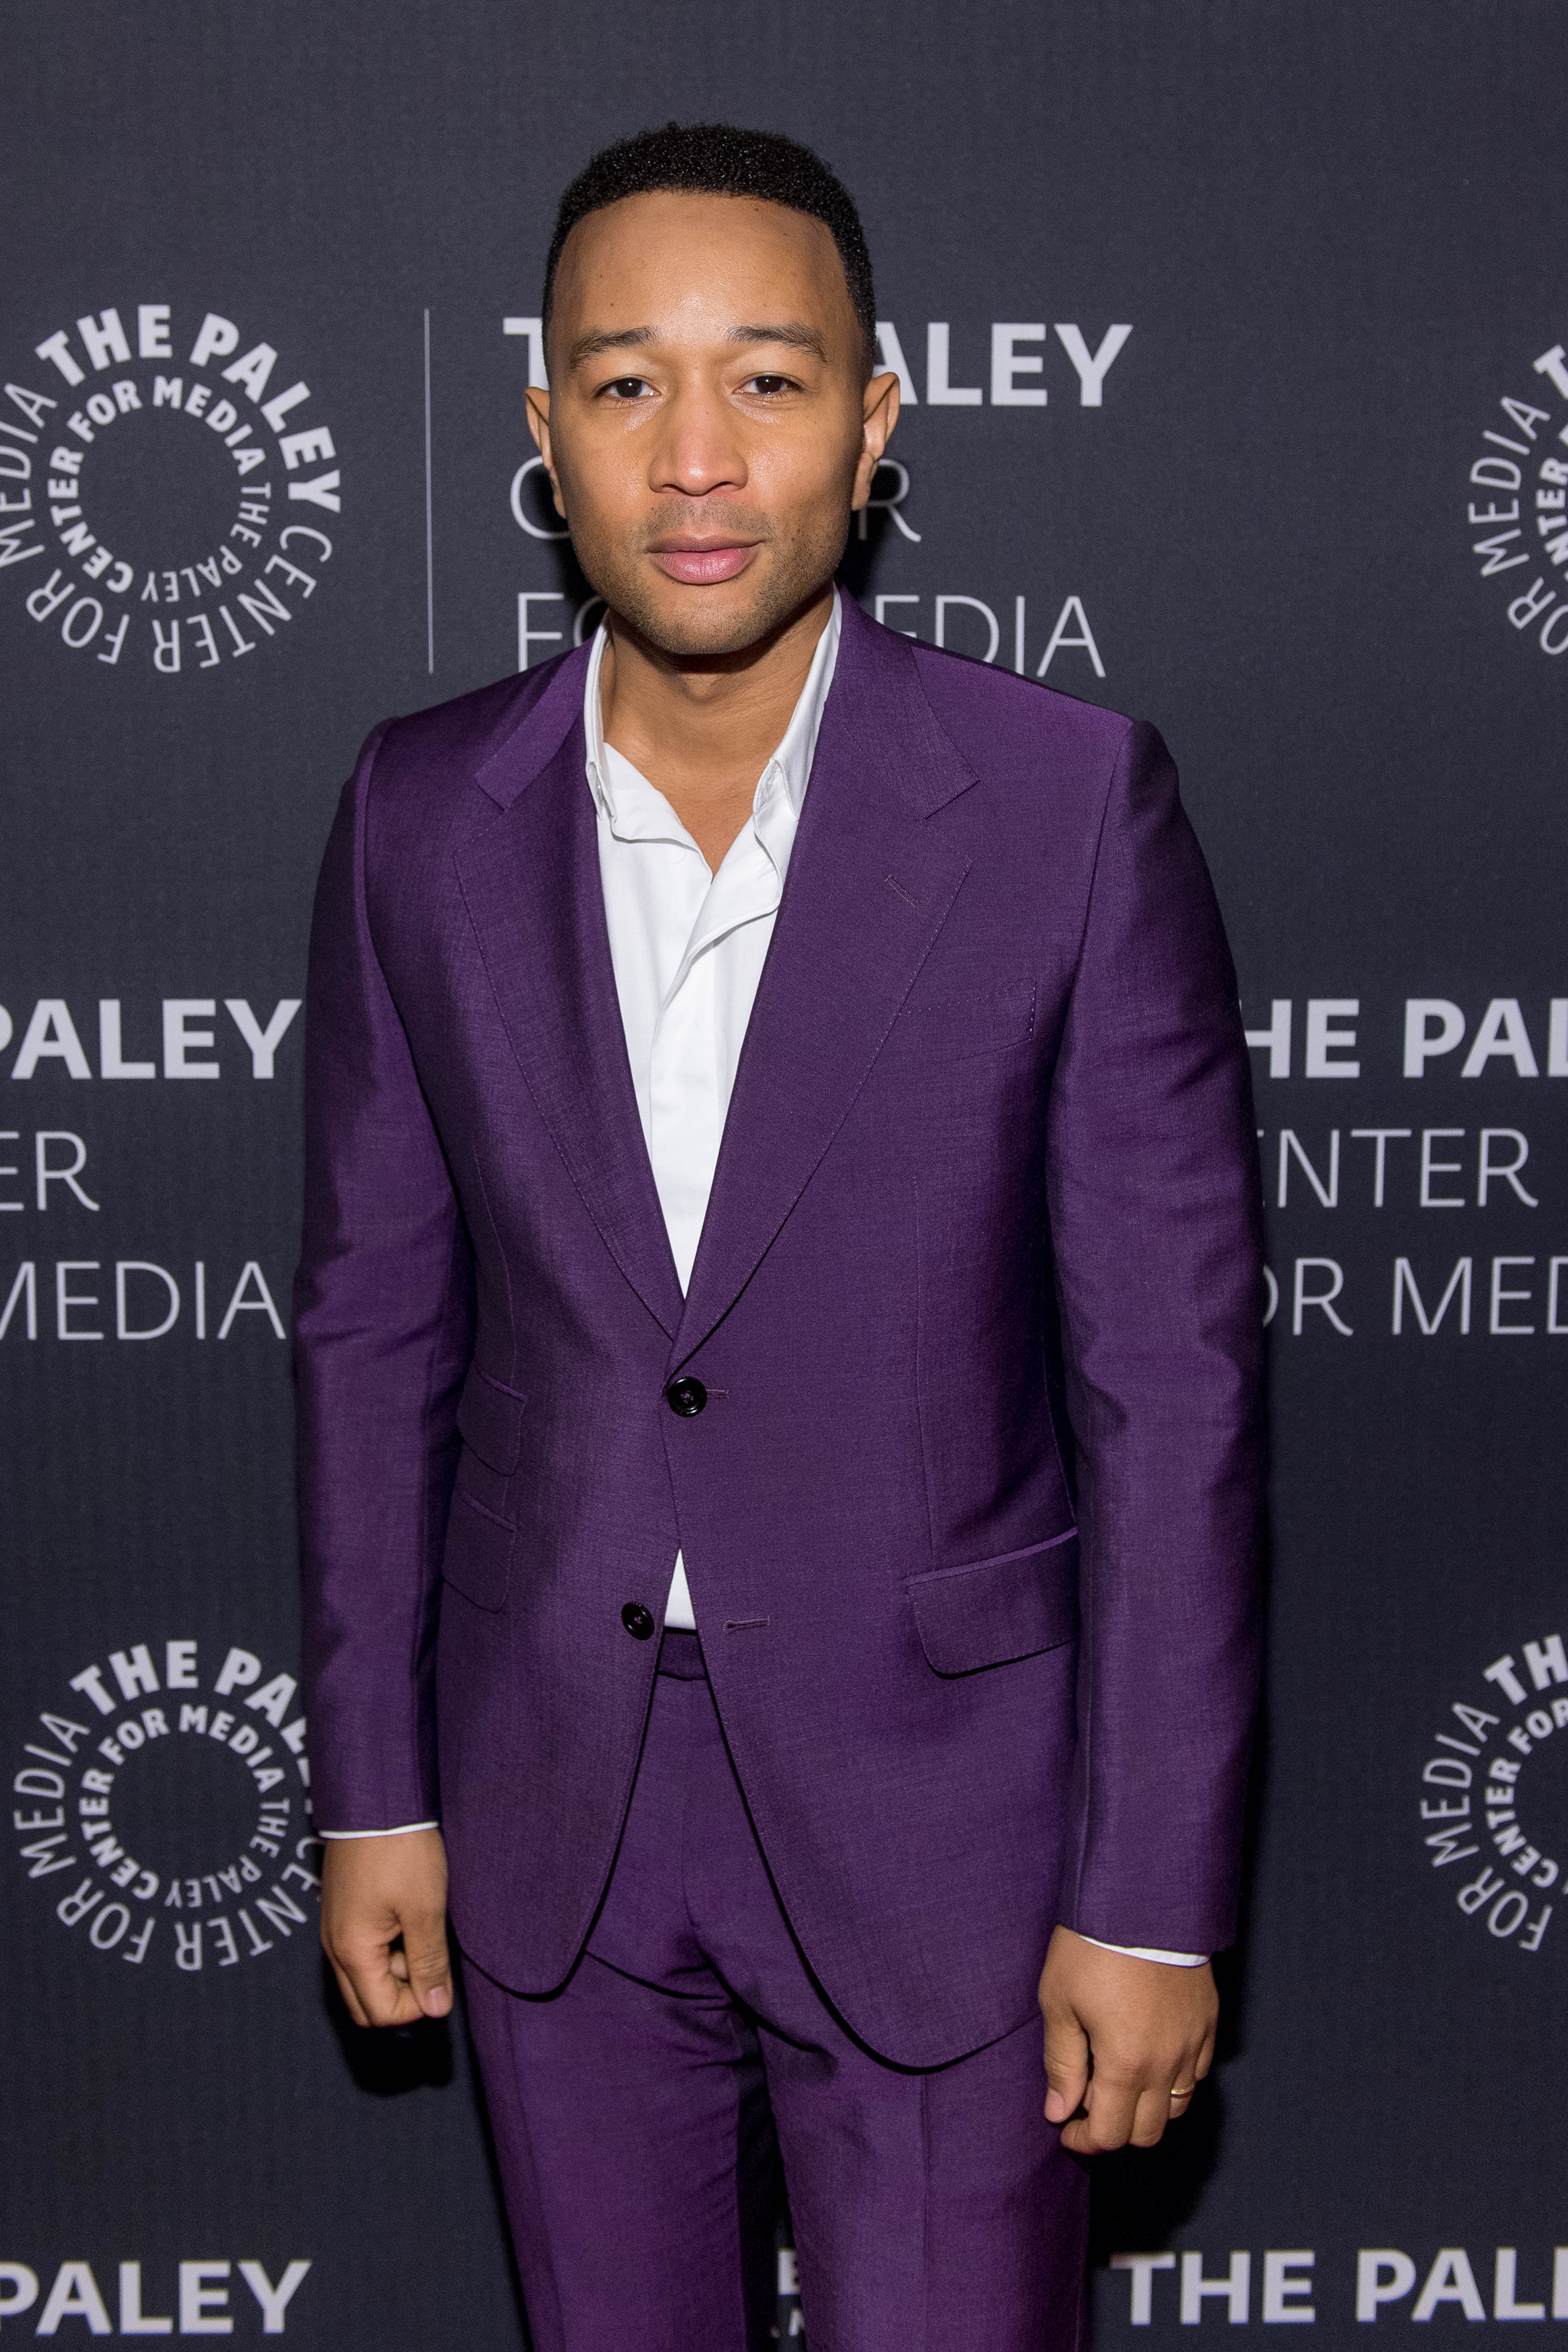 John Legend attends a Paley Center for Media event in New York City on February 26, 2018 | Photo: Getty Images